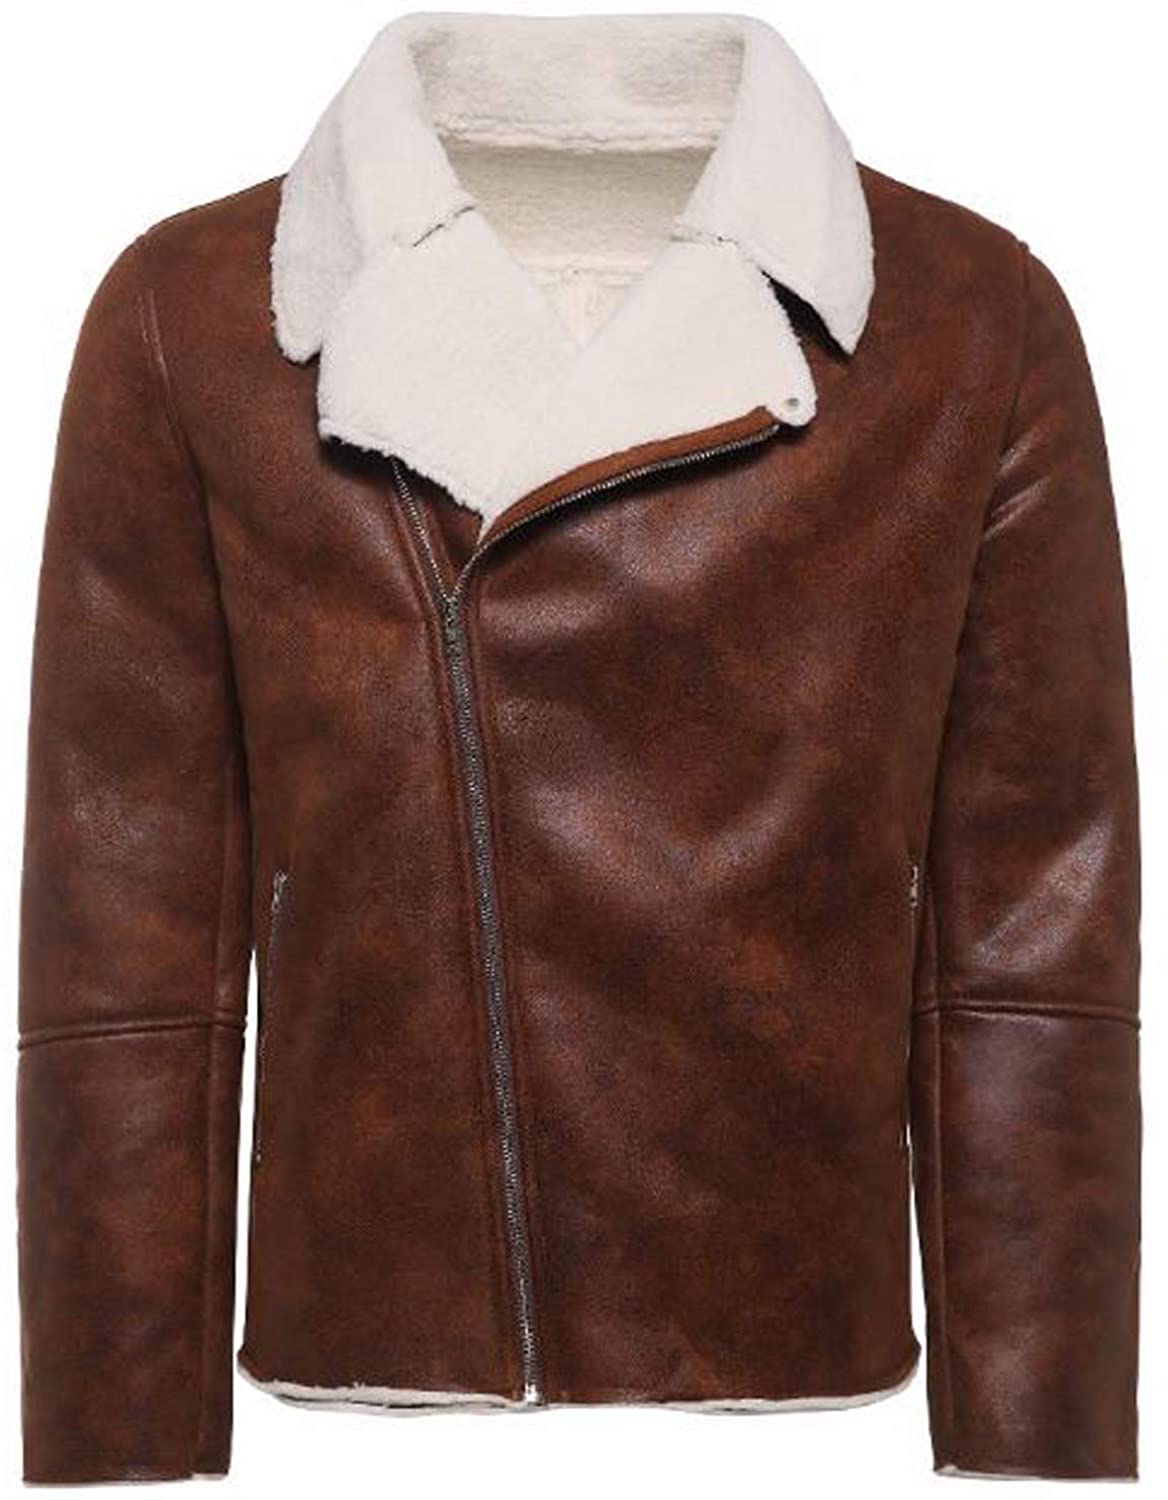 Men White Shearling FUR Genuine Sheepskin Leather Jacket With Stylish Zip In Brown